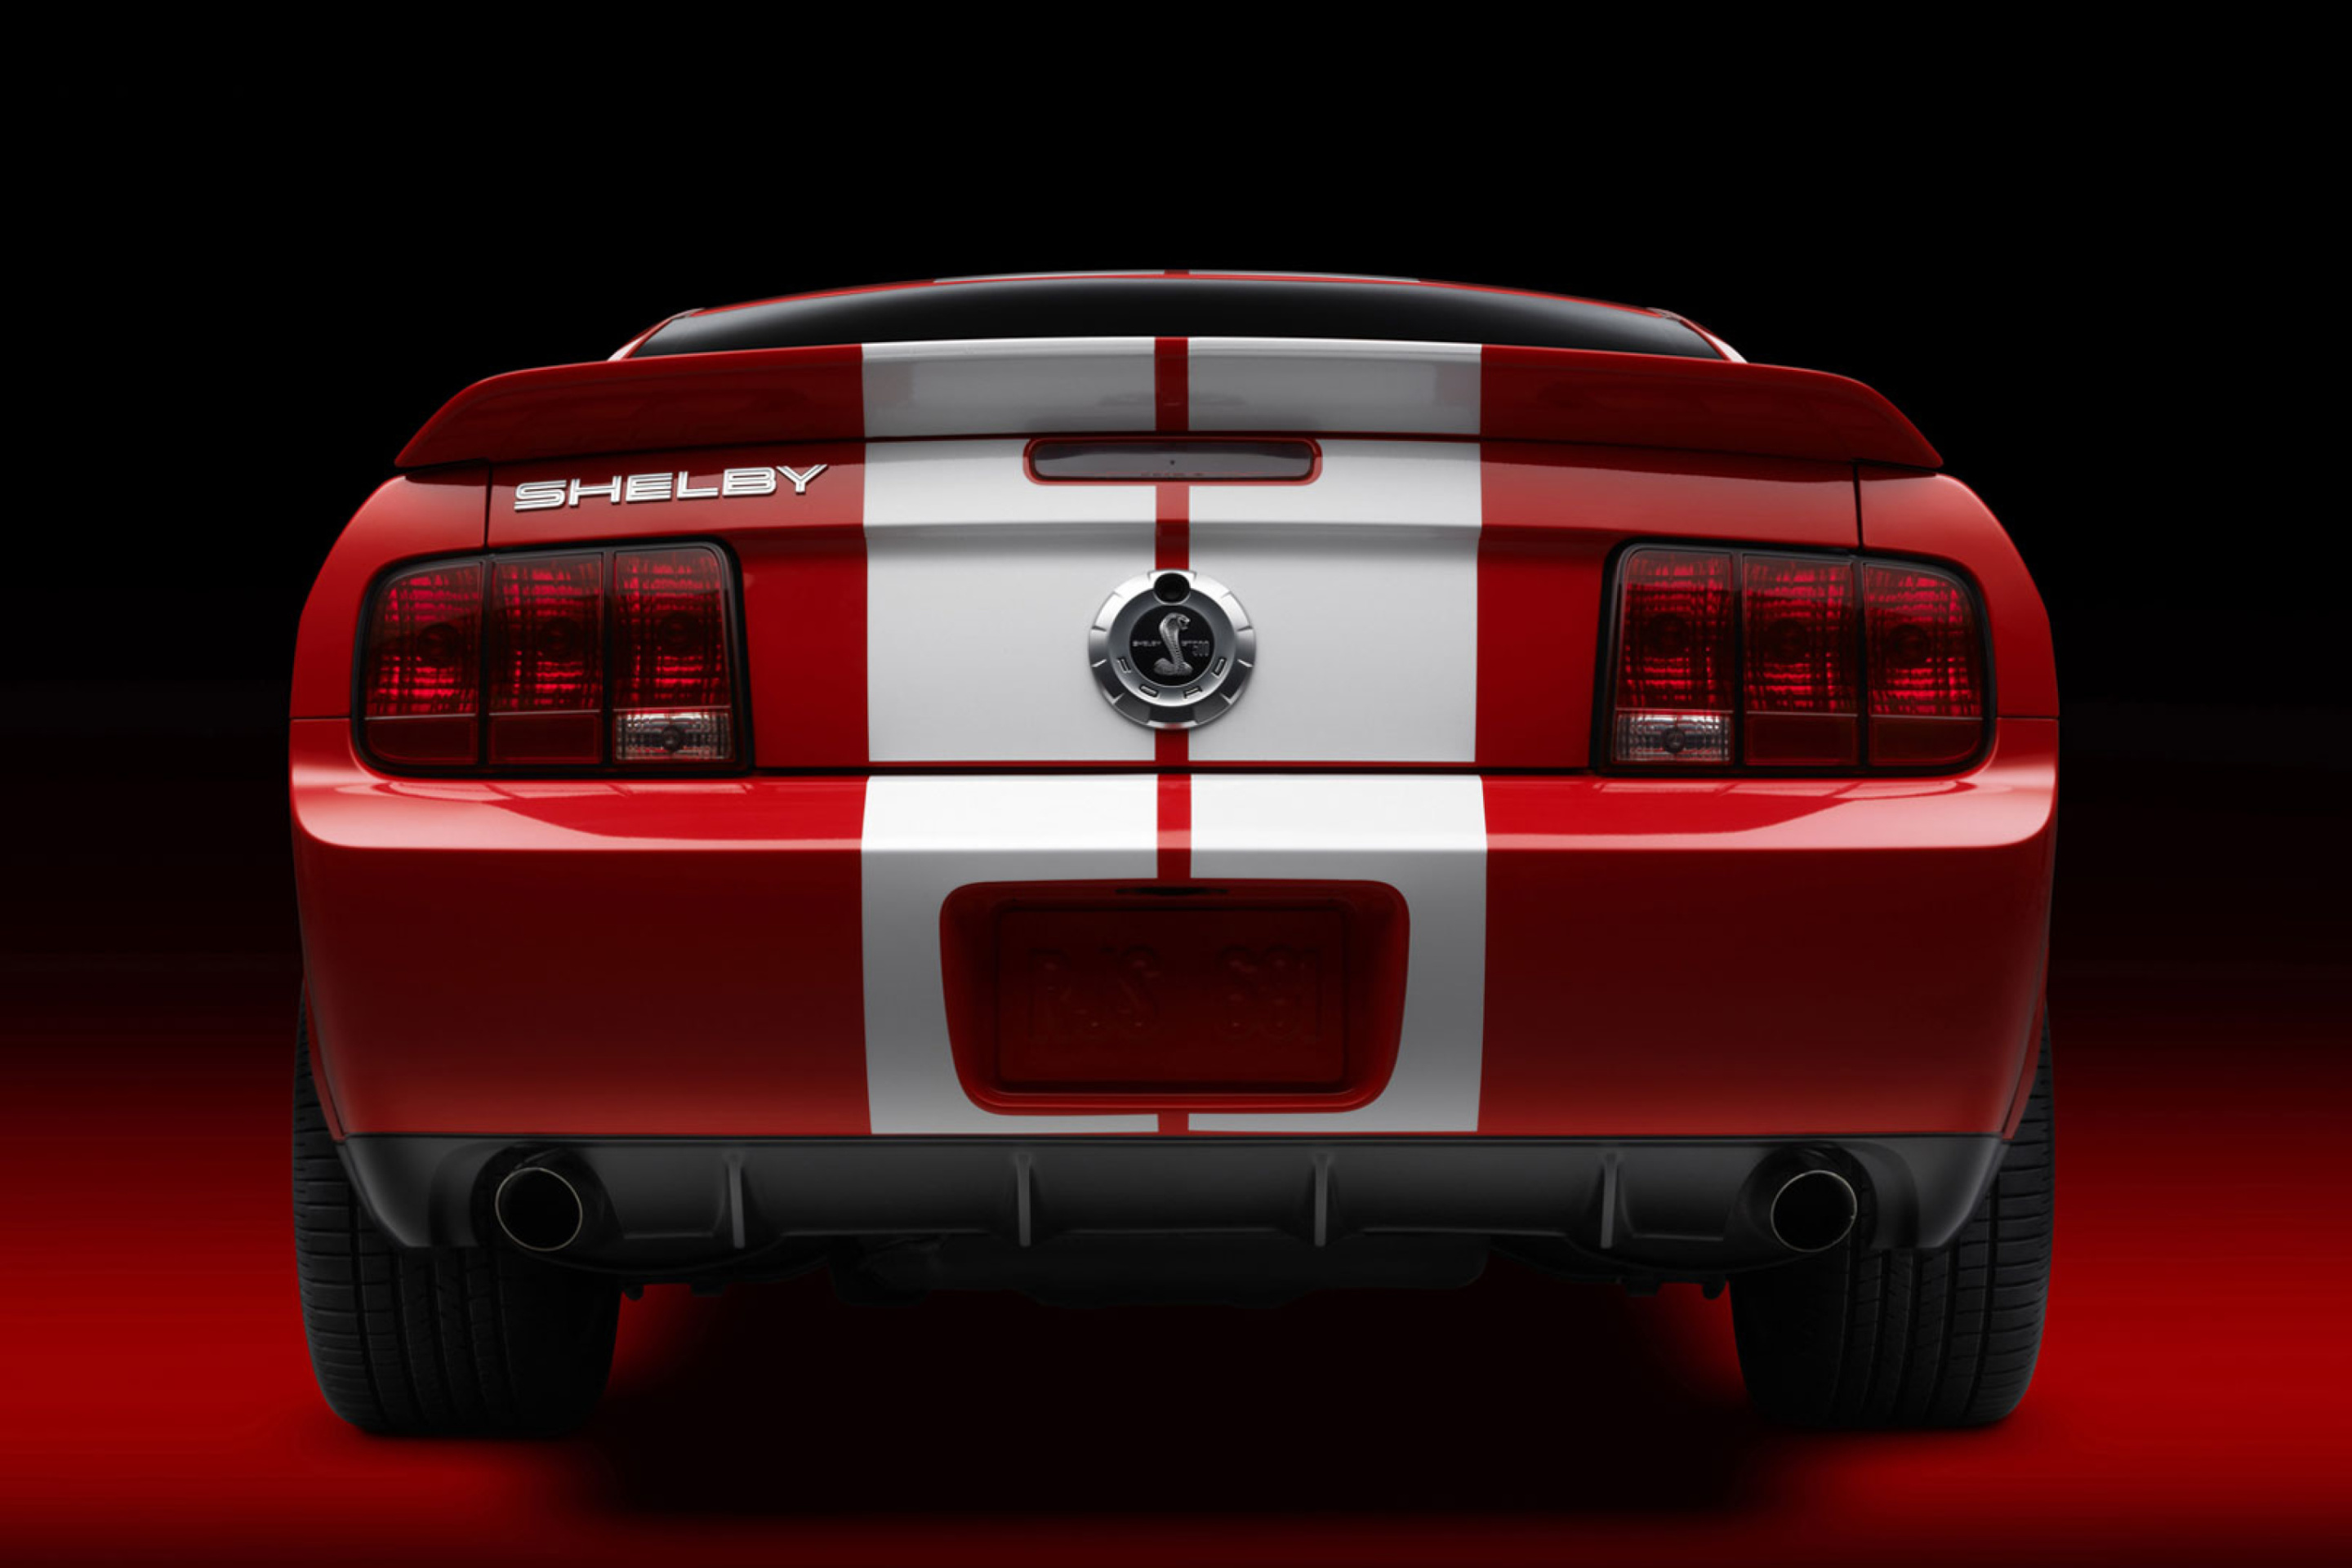 Das Ford Mustang Shelby GT500 Wallpaper 2880x1920